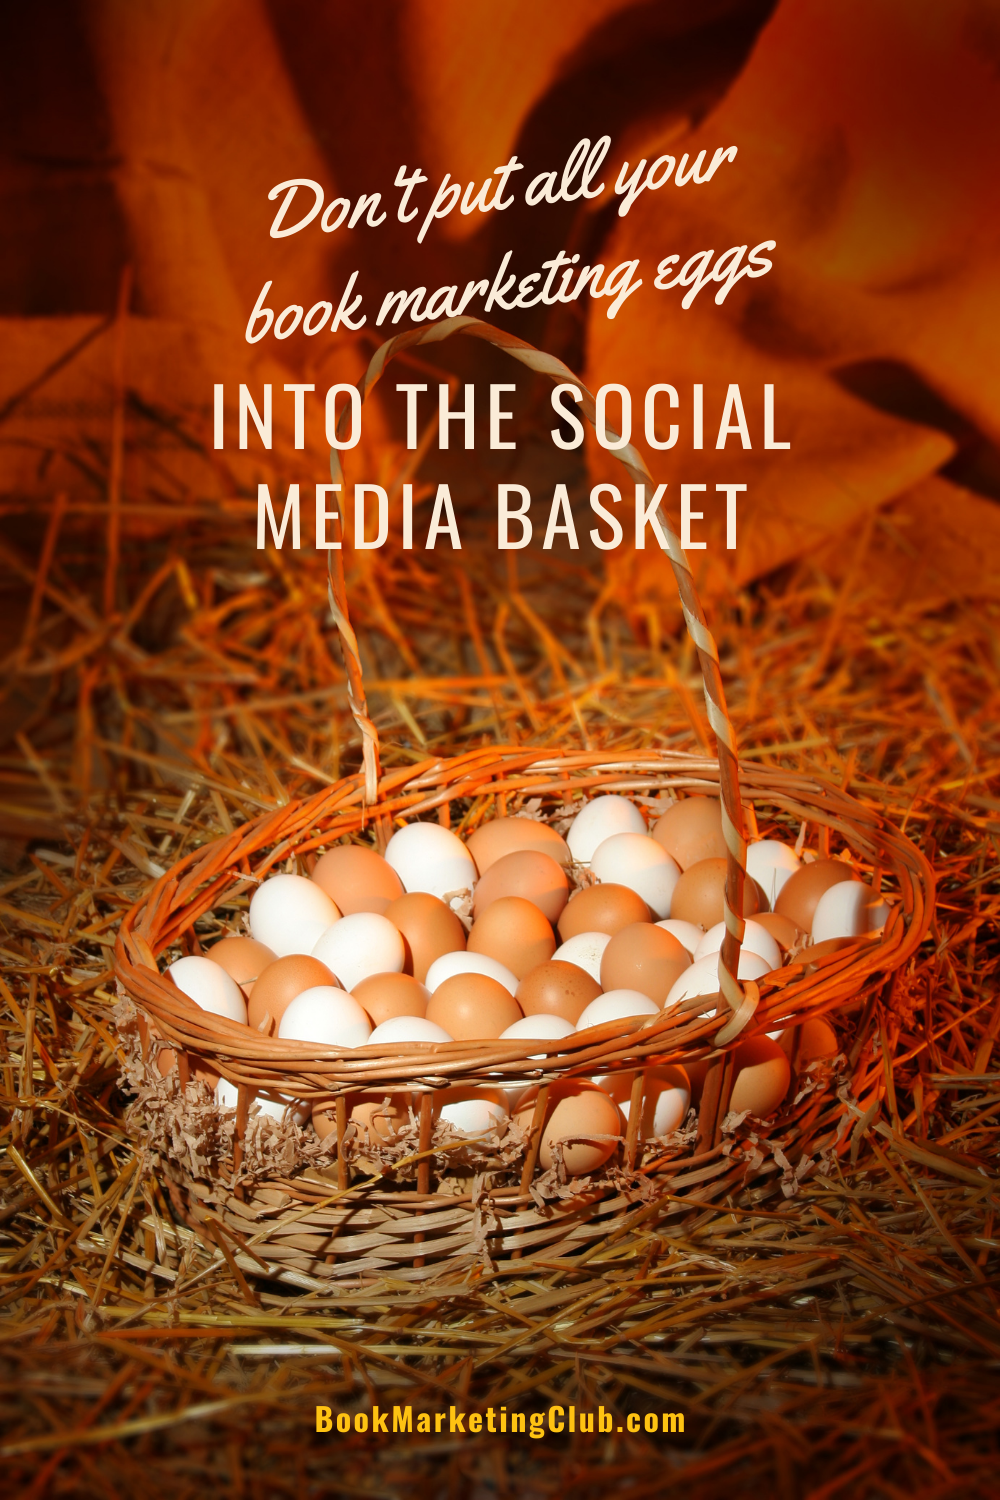 Don't put all your book marketing eggs into the social media basket